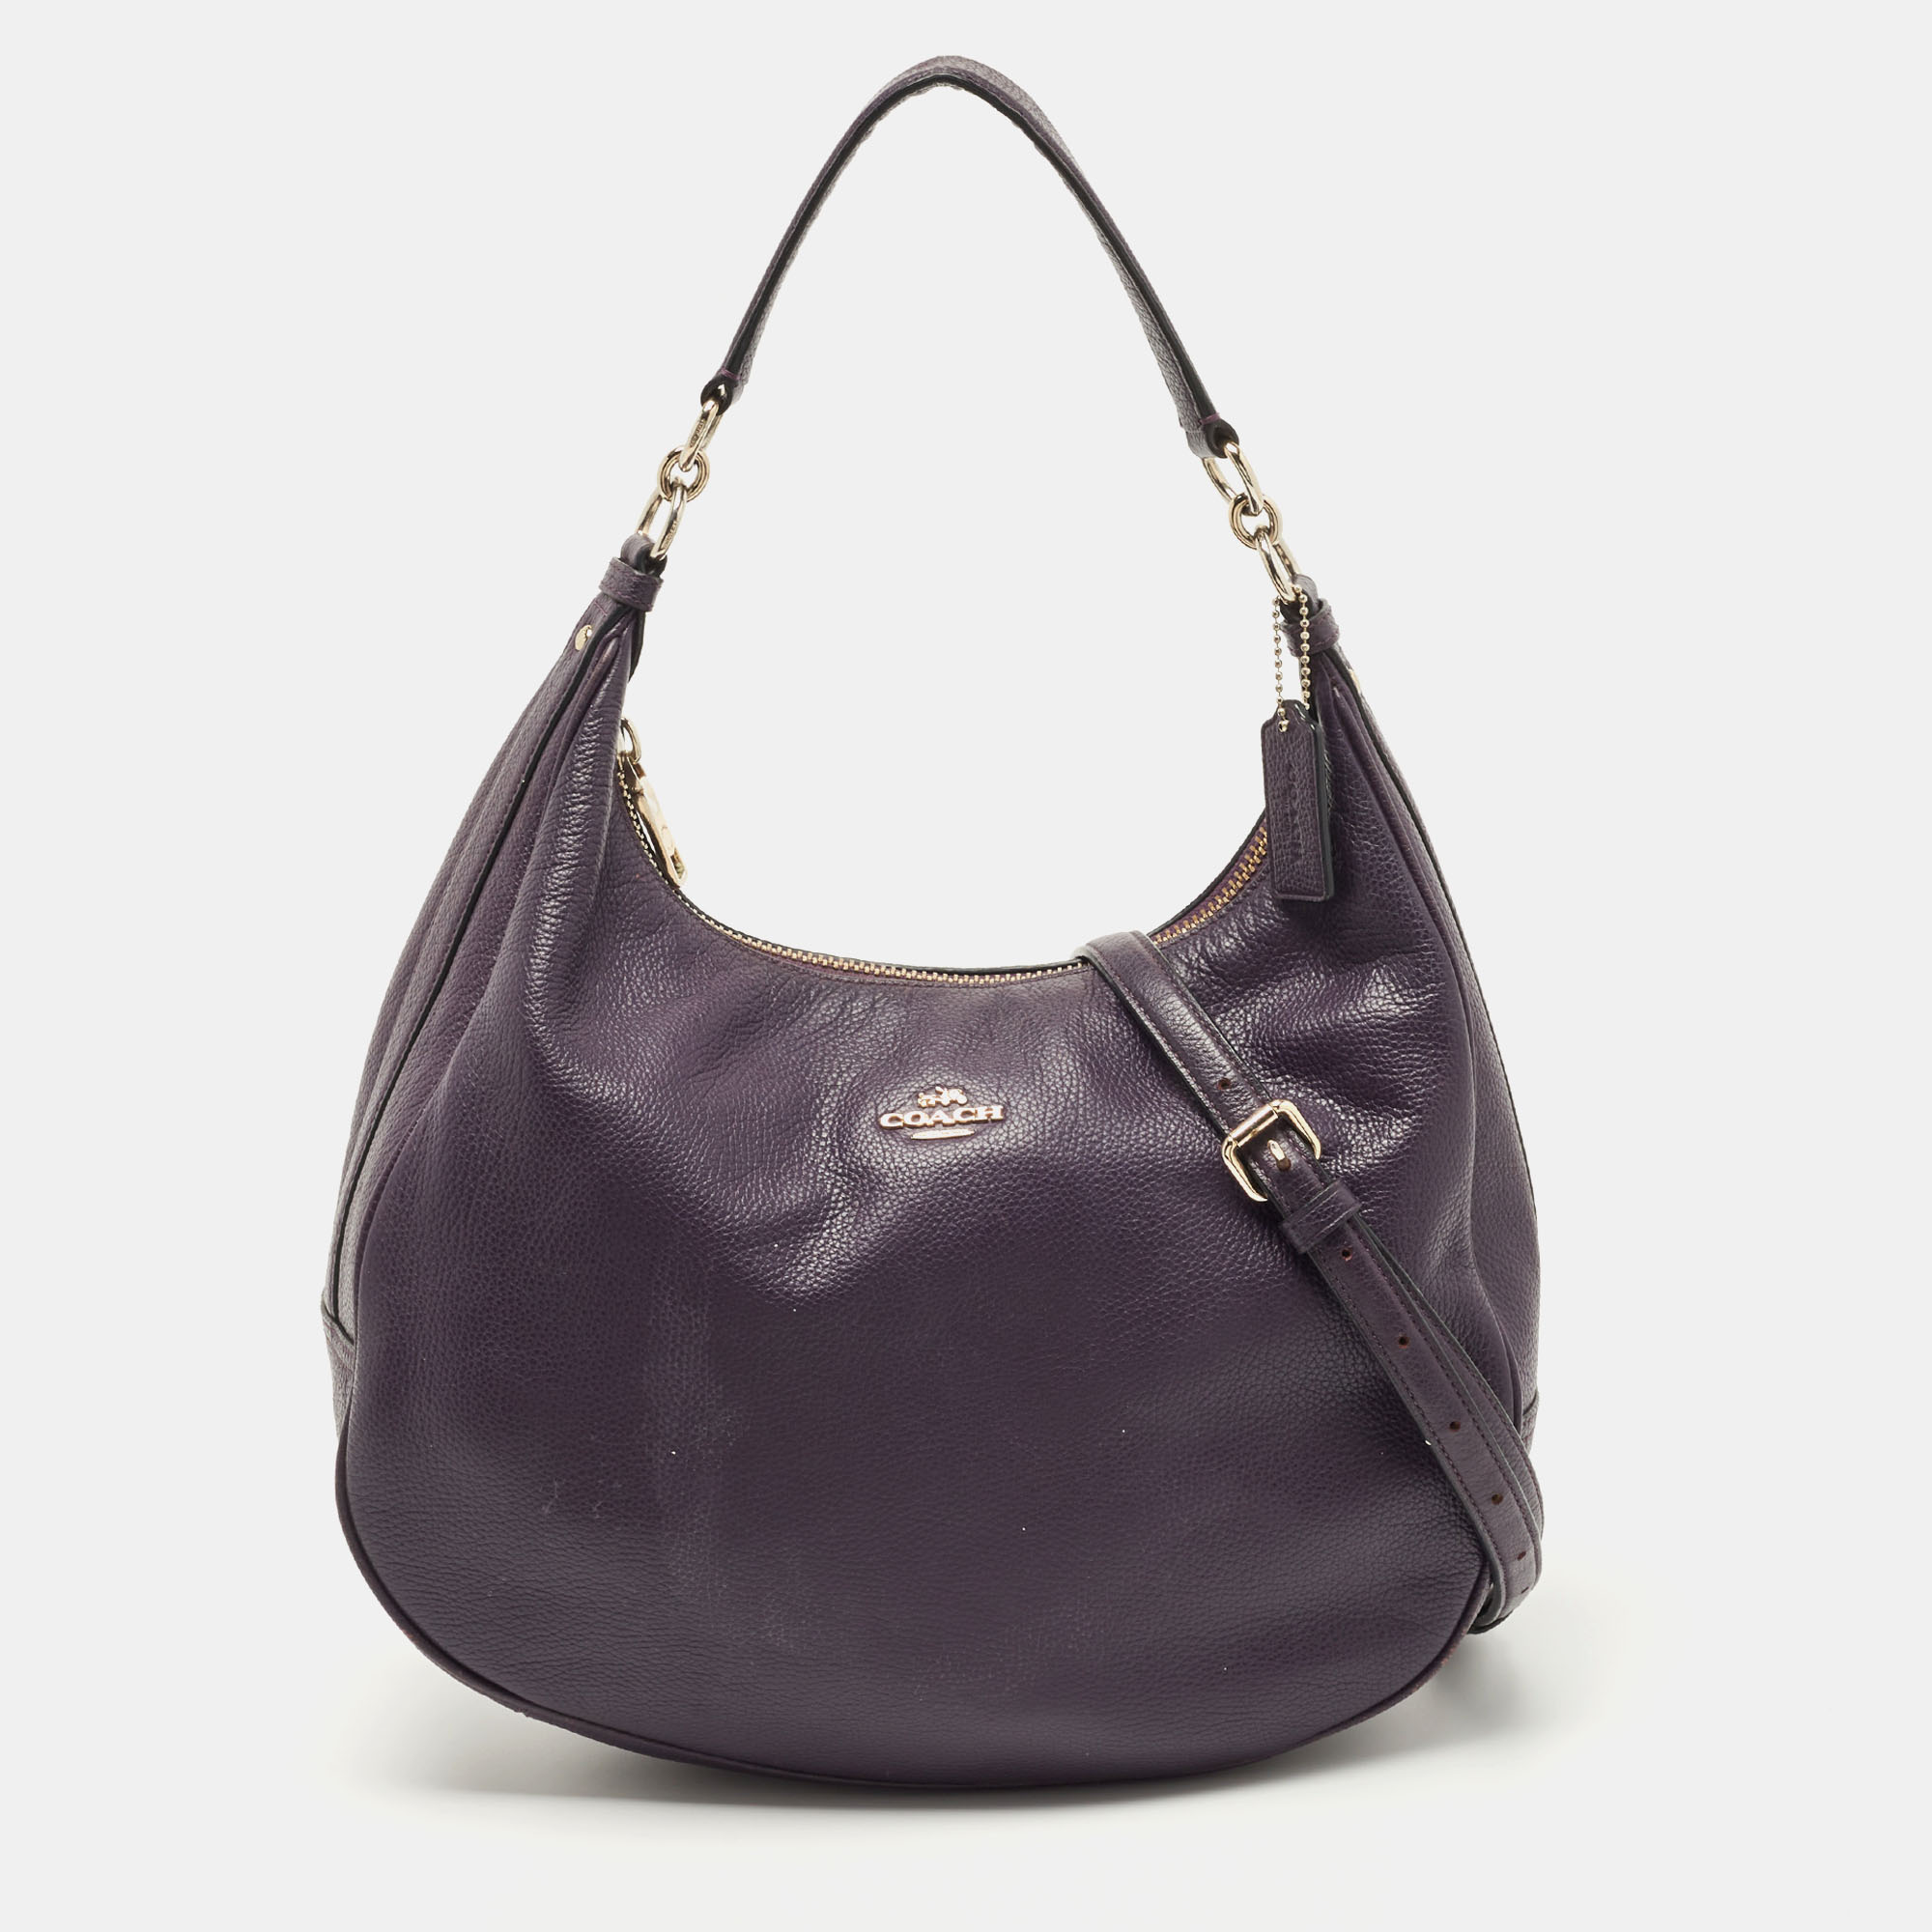 Pre-owned Coach Purple Leather Harley Hobo